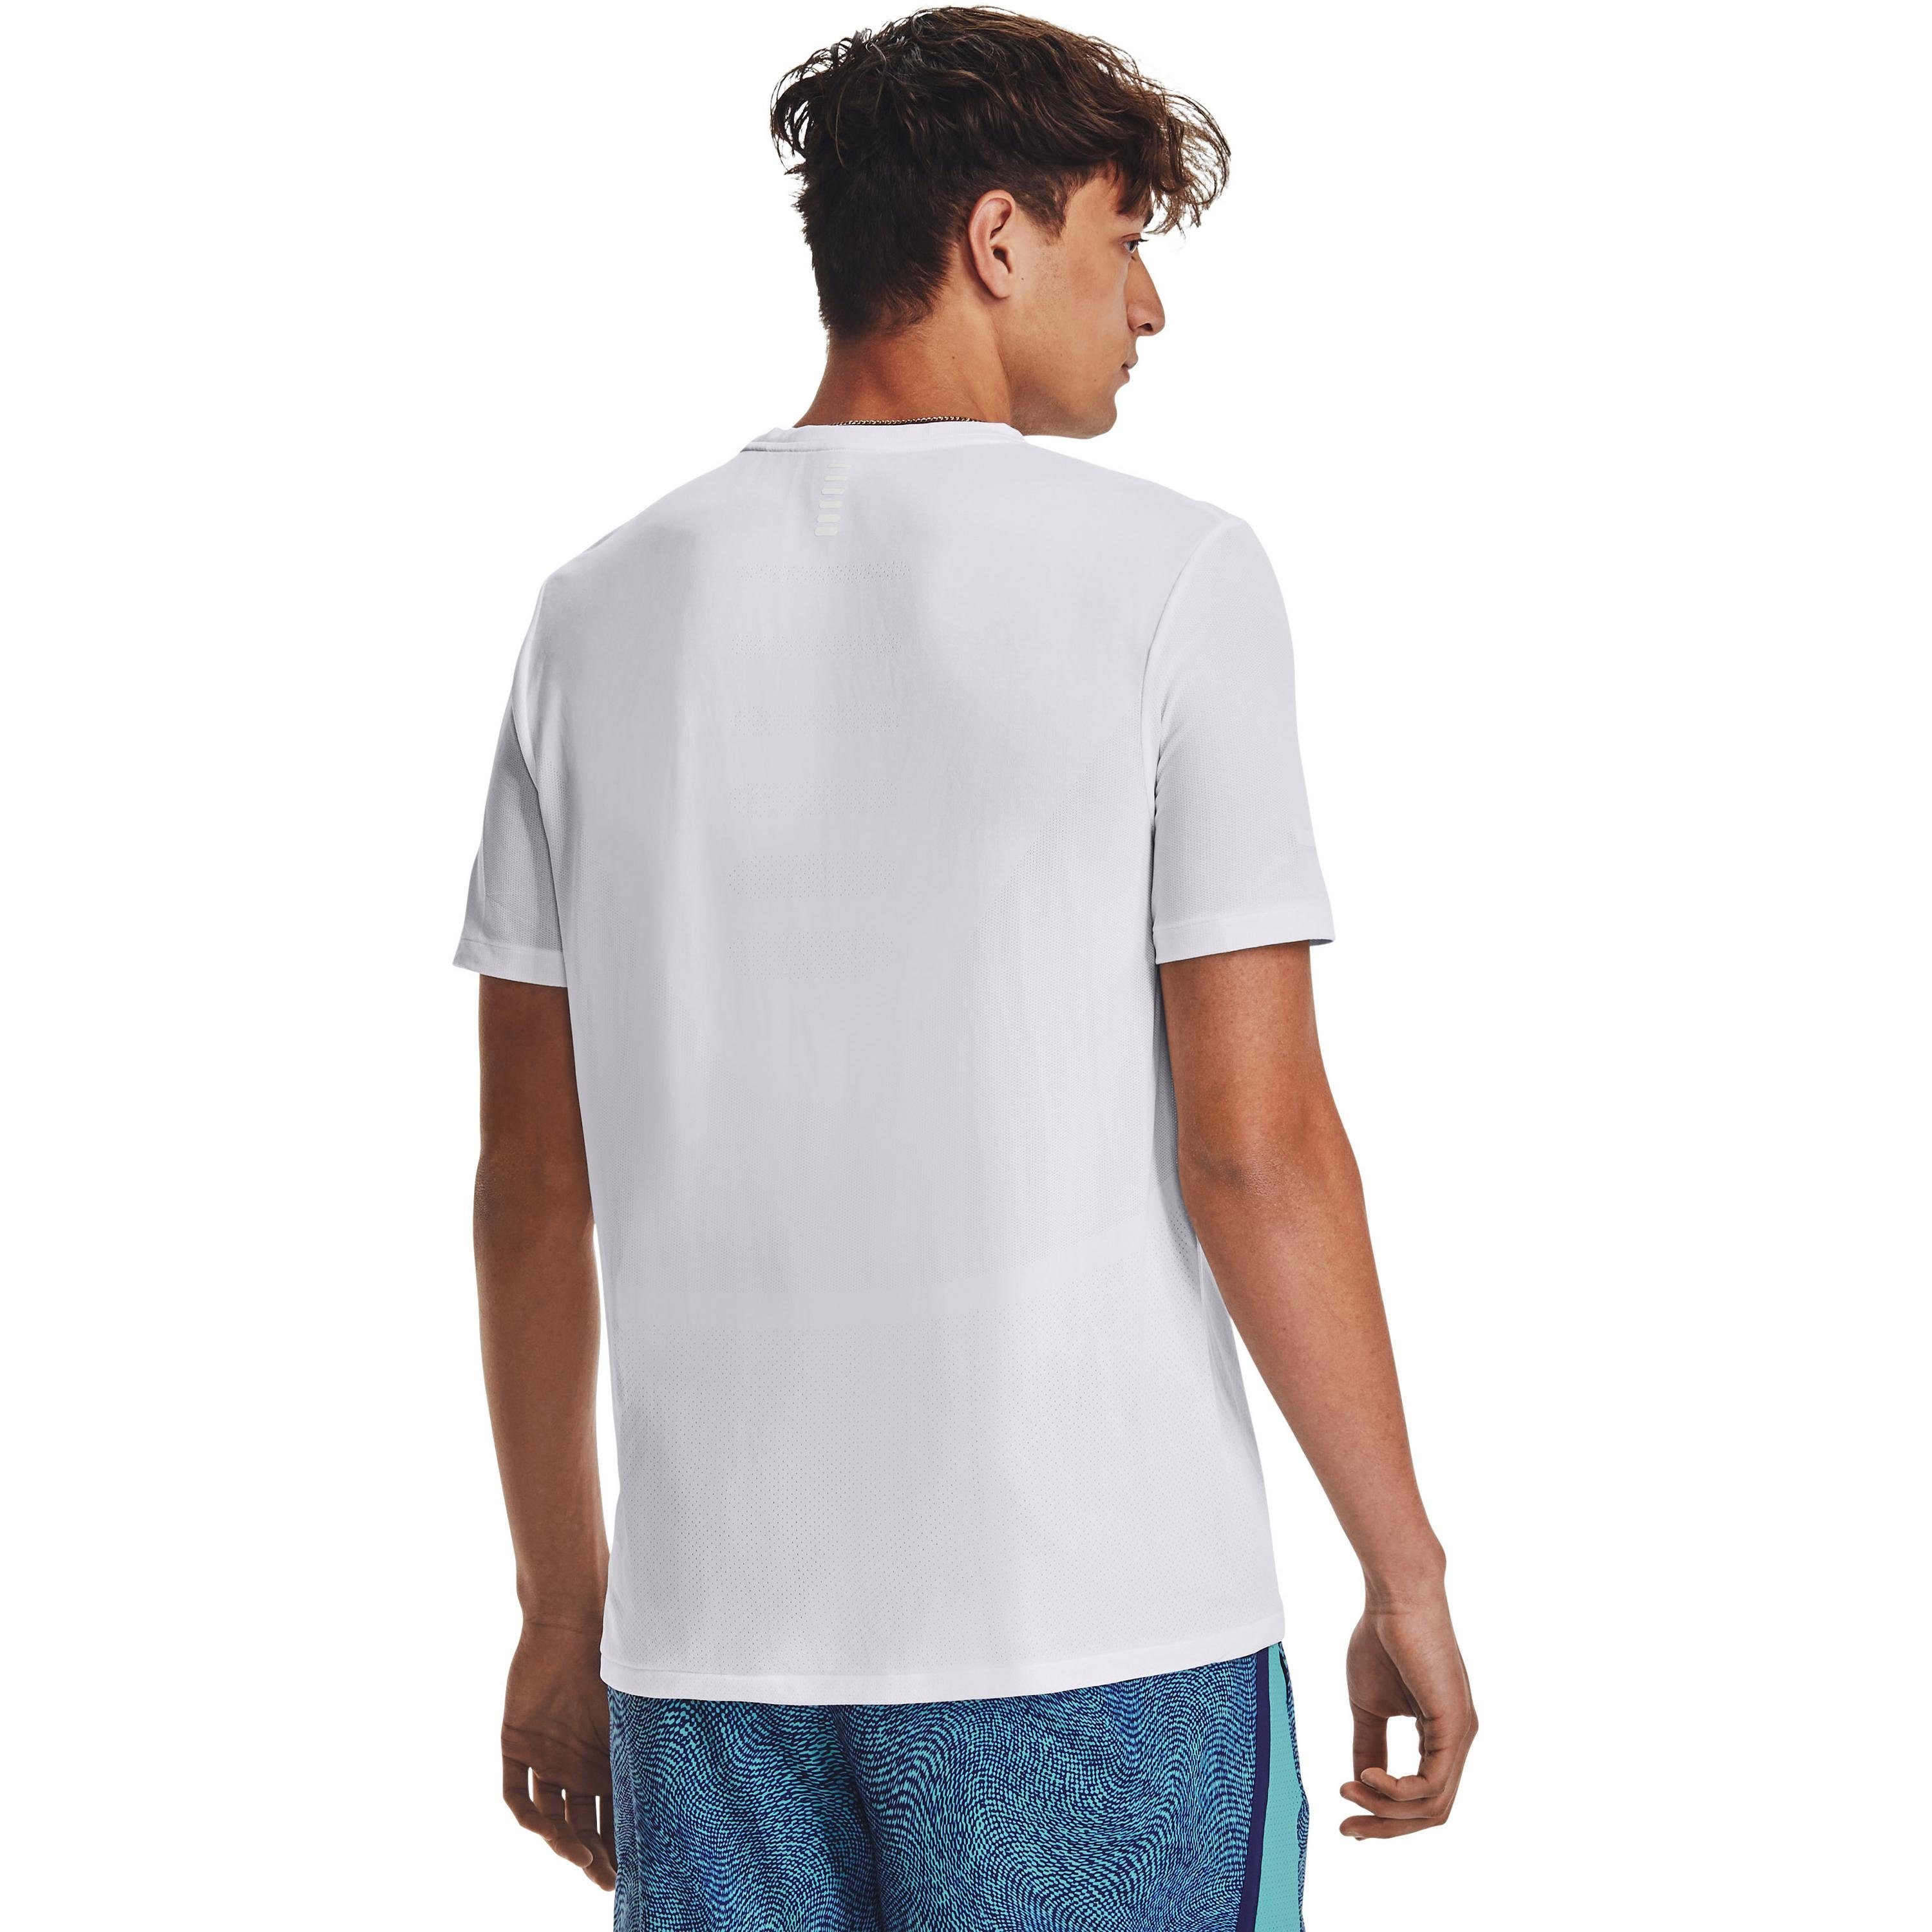 Under Funktionsshirt SEAMLESS white-reflective Armour®